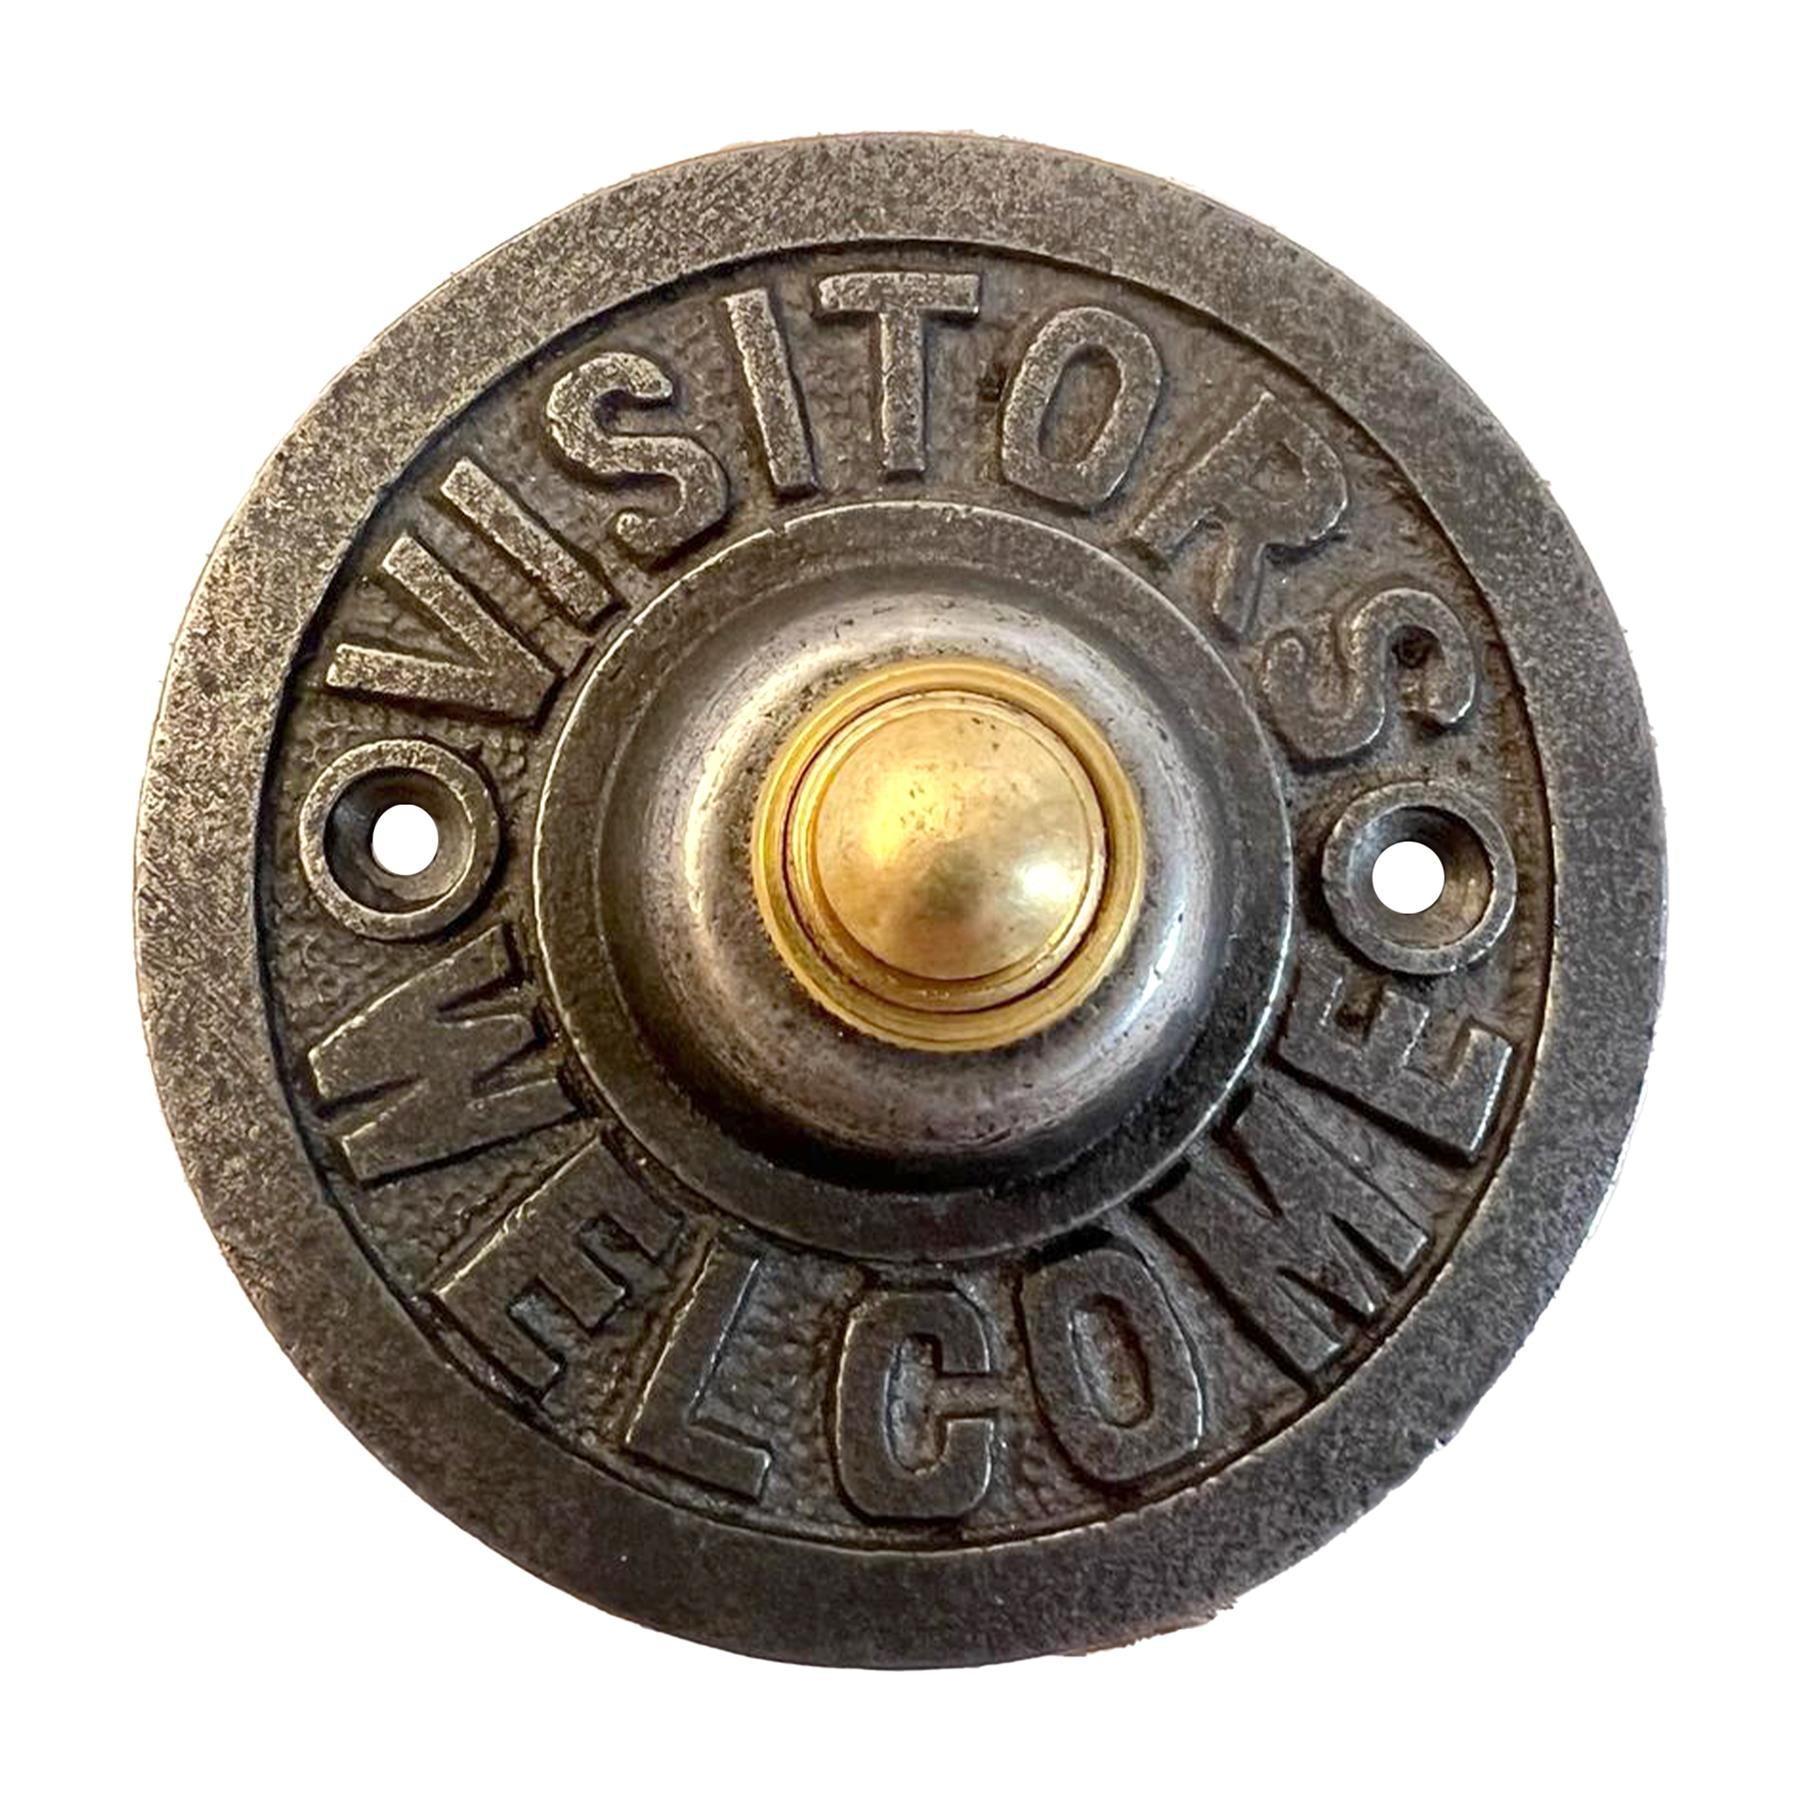 Cast iron traditional round Doorbell Push Button, Visitors welcome